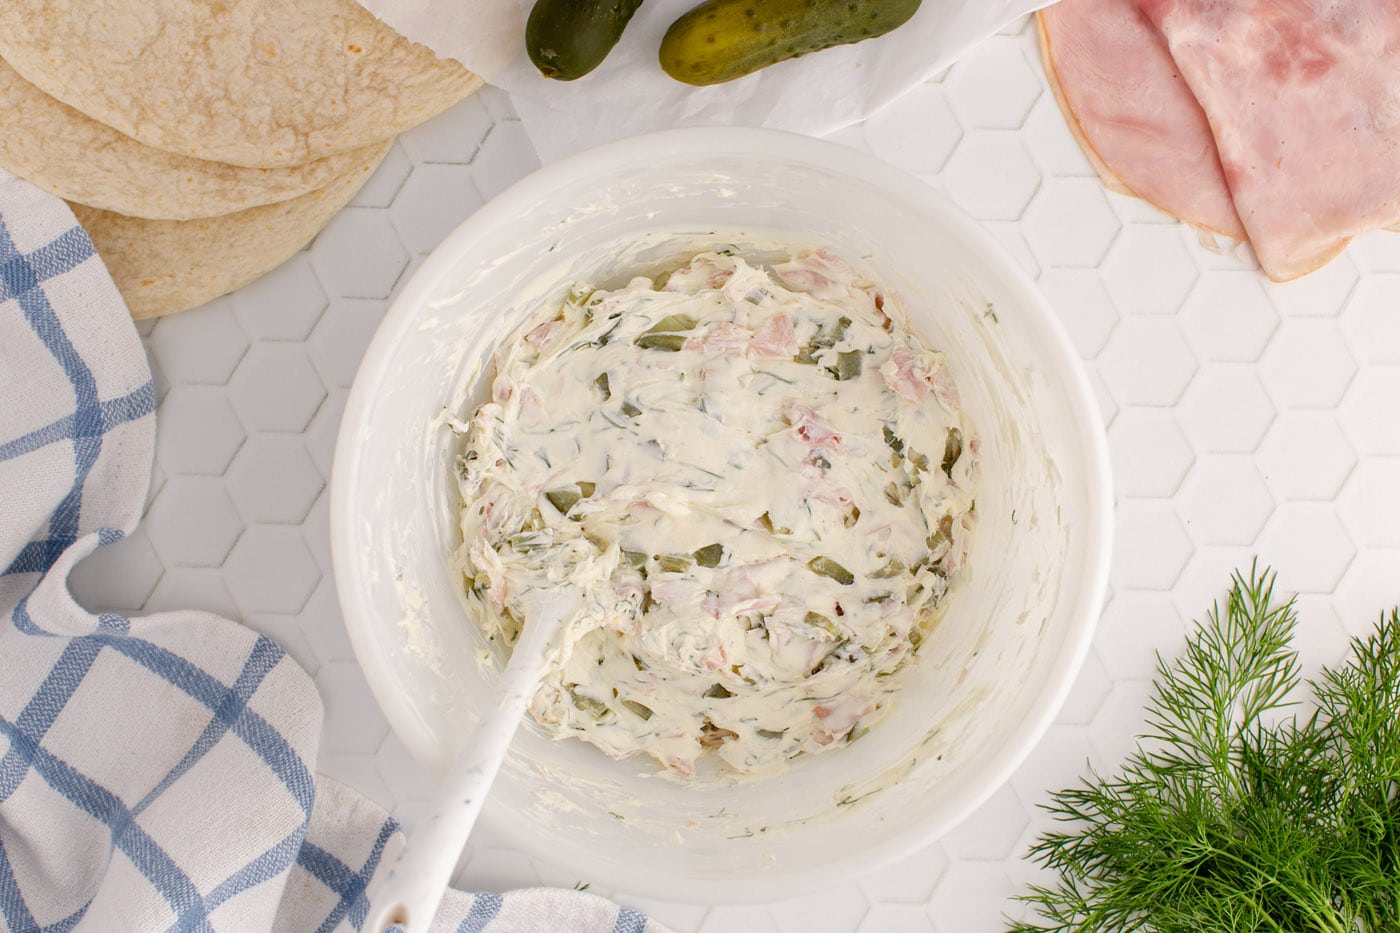 dill pickle cream cheese in a bowl